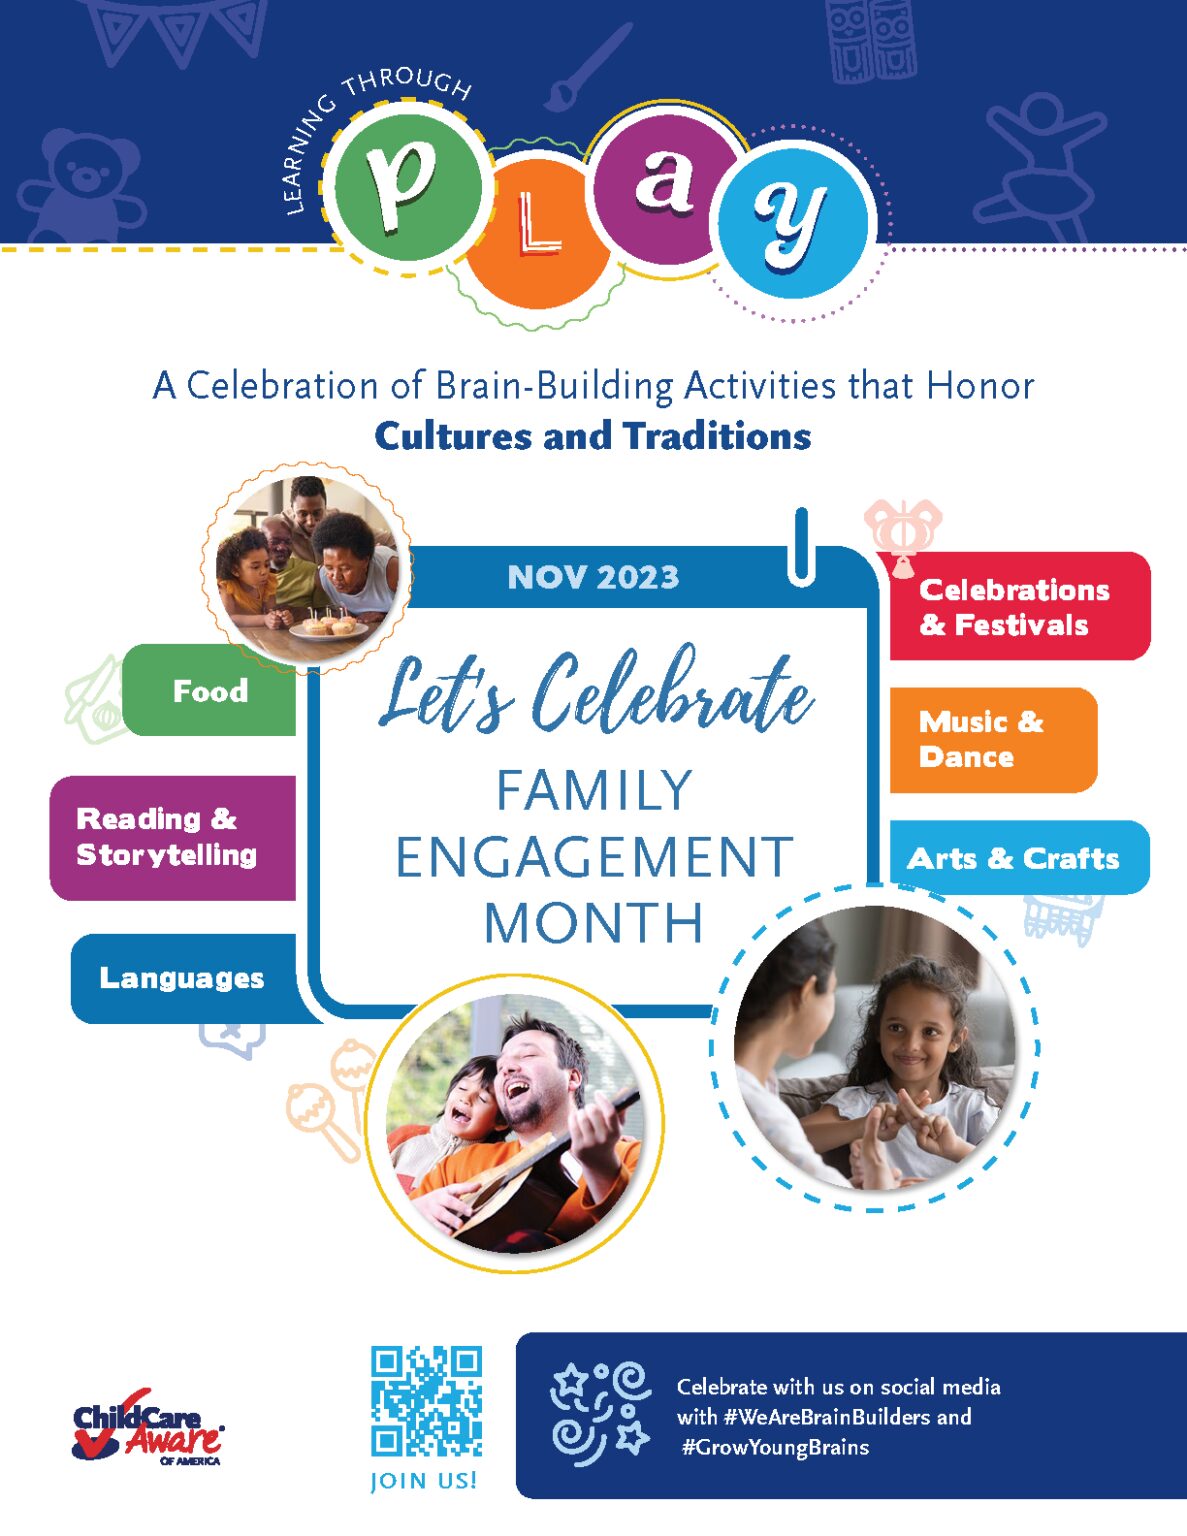 Family Engagement Month Child Care Aware® of America